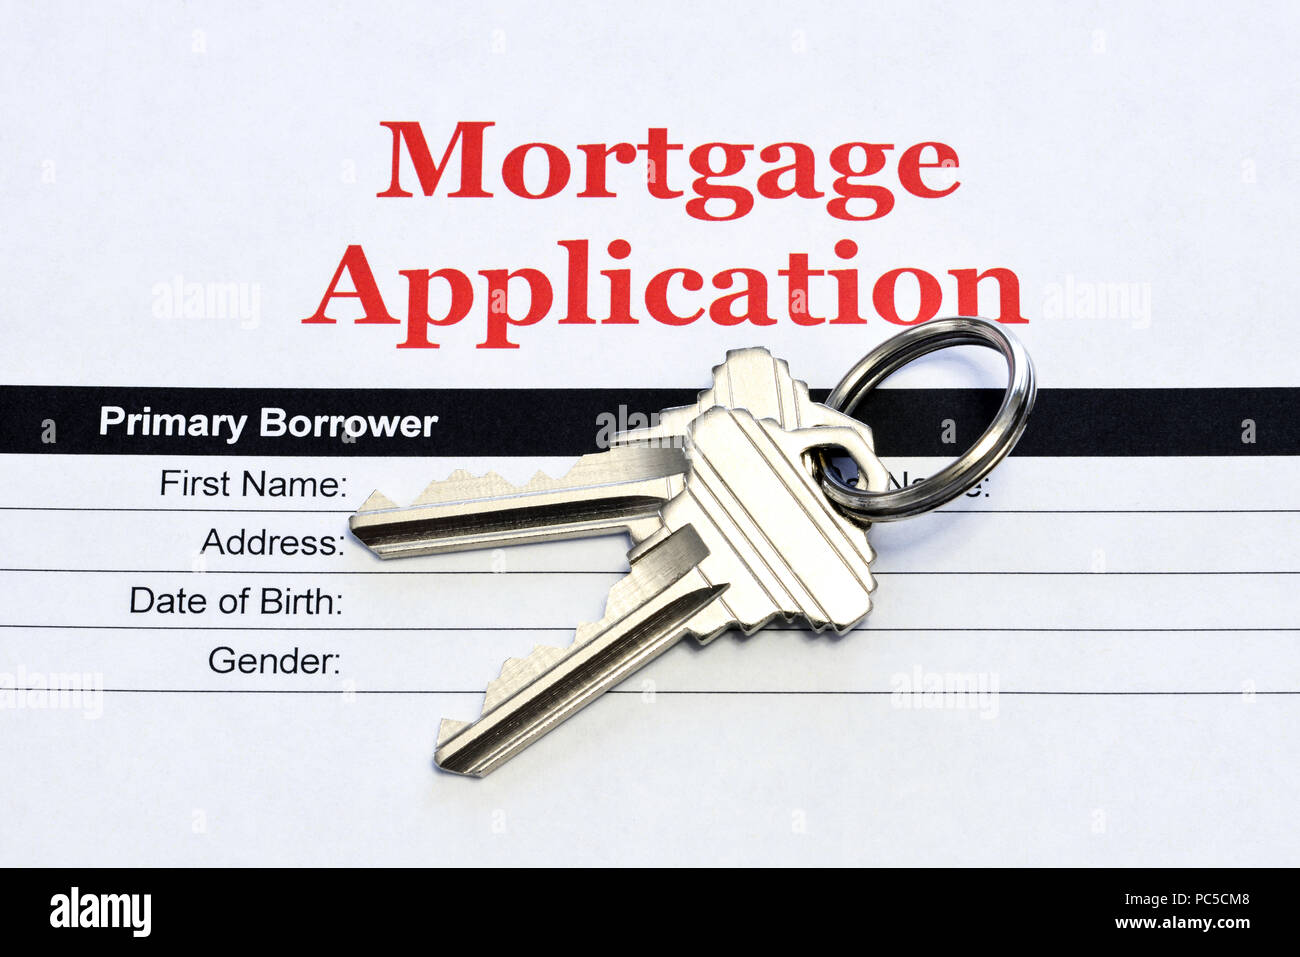 Real Estate Mortgage Application Loan Document With House Keys Stock Photo